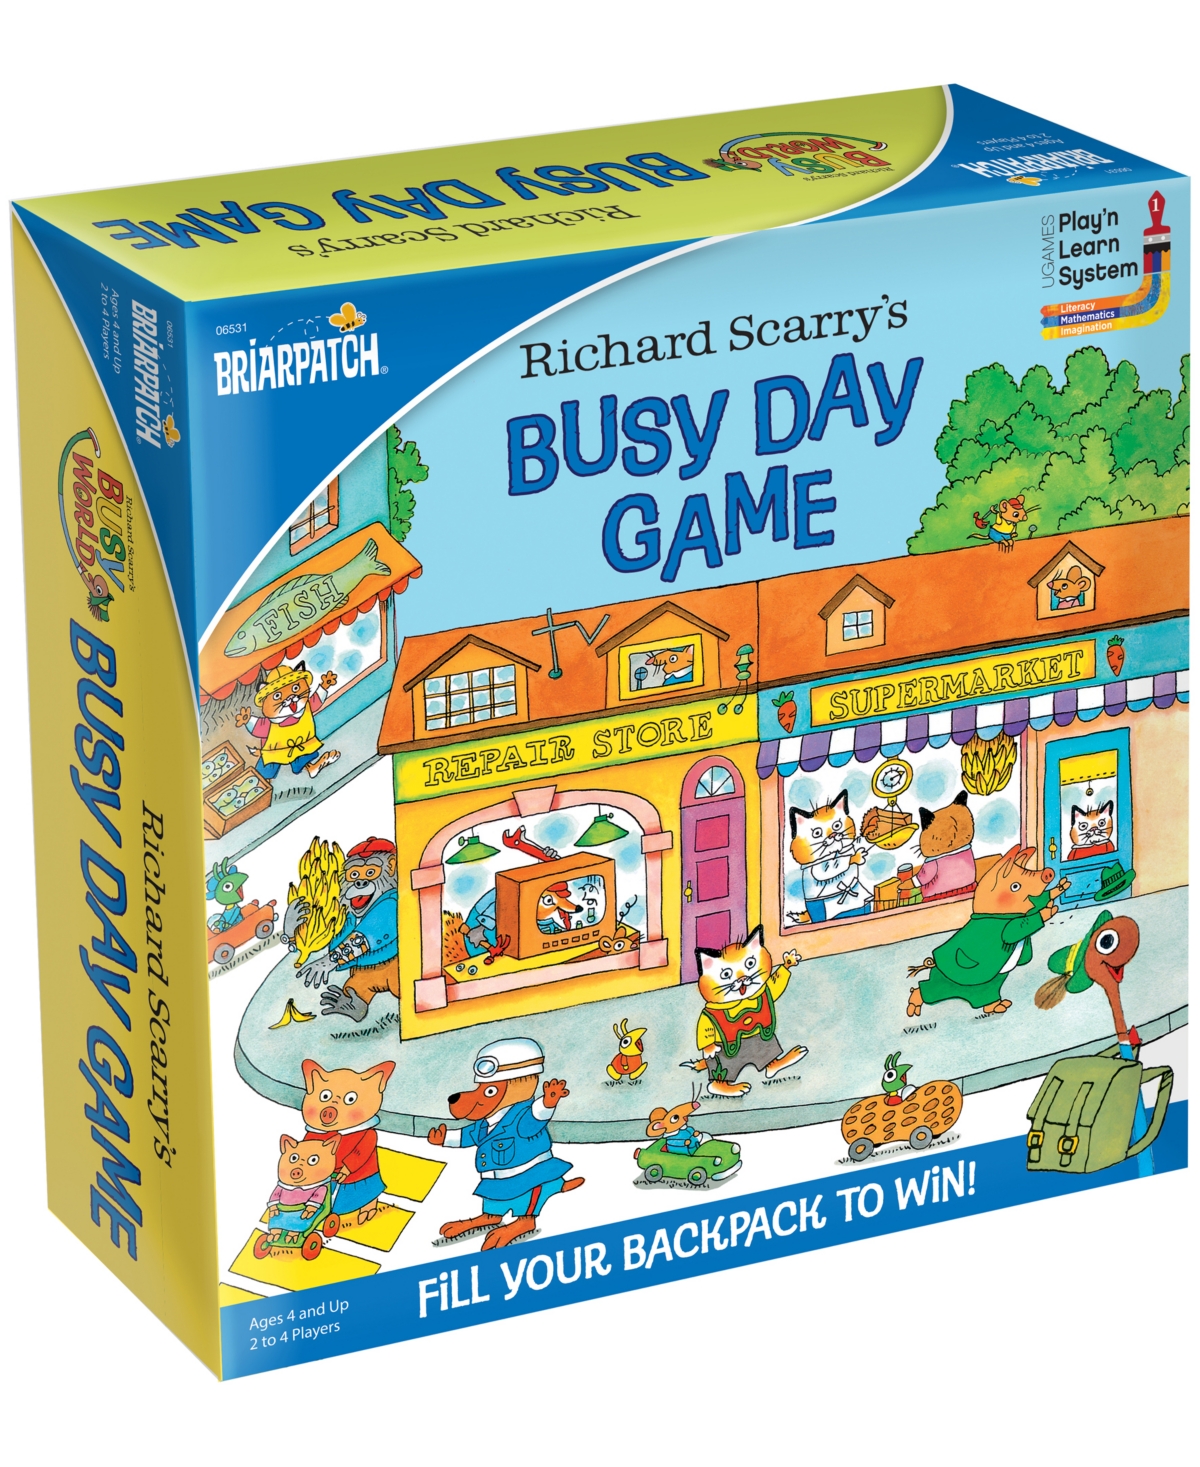 Briarpatch Babies' Richard Scarry's Busy Day Game Set, 28 Piece In Multi Color